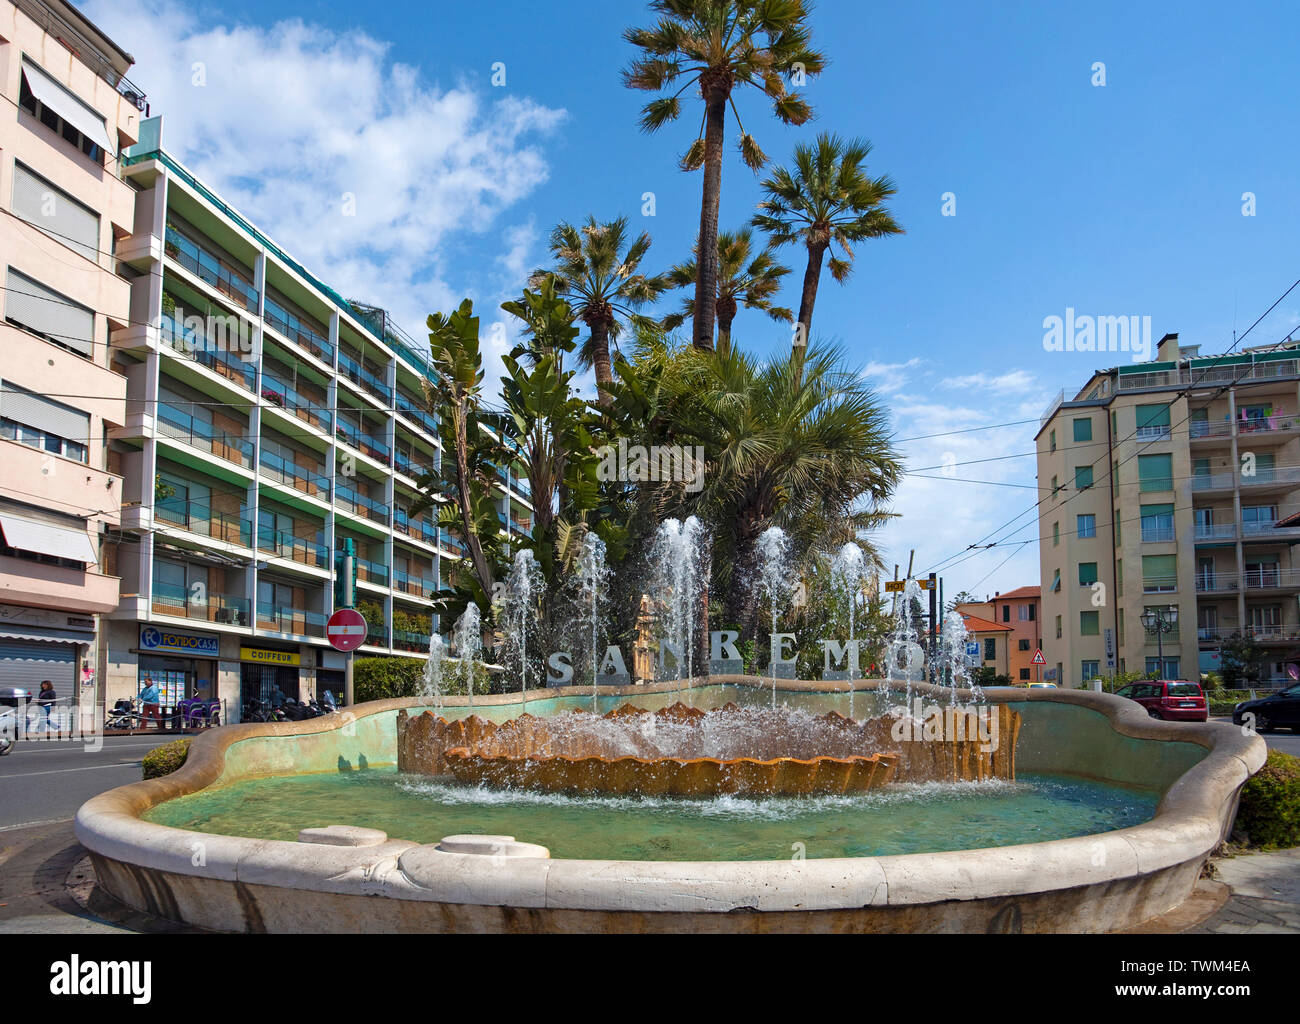 Fountain with letters San Remo, street in San Remo, harbour town at the ligurian coast, Liguria, Italy Stock Photo